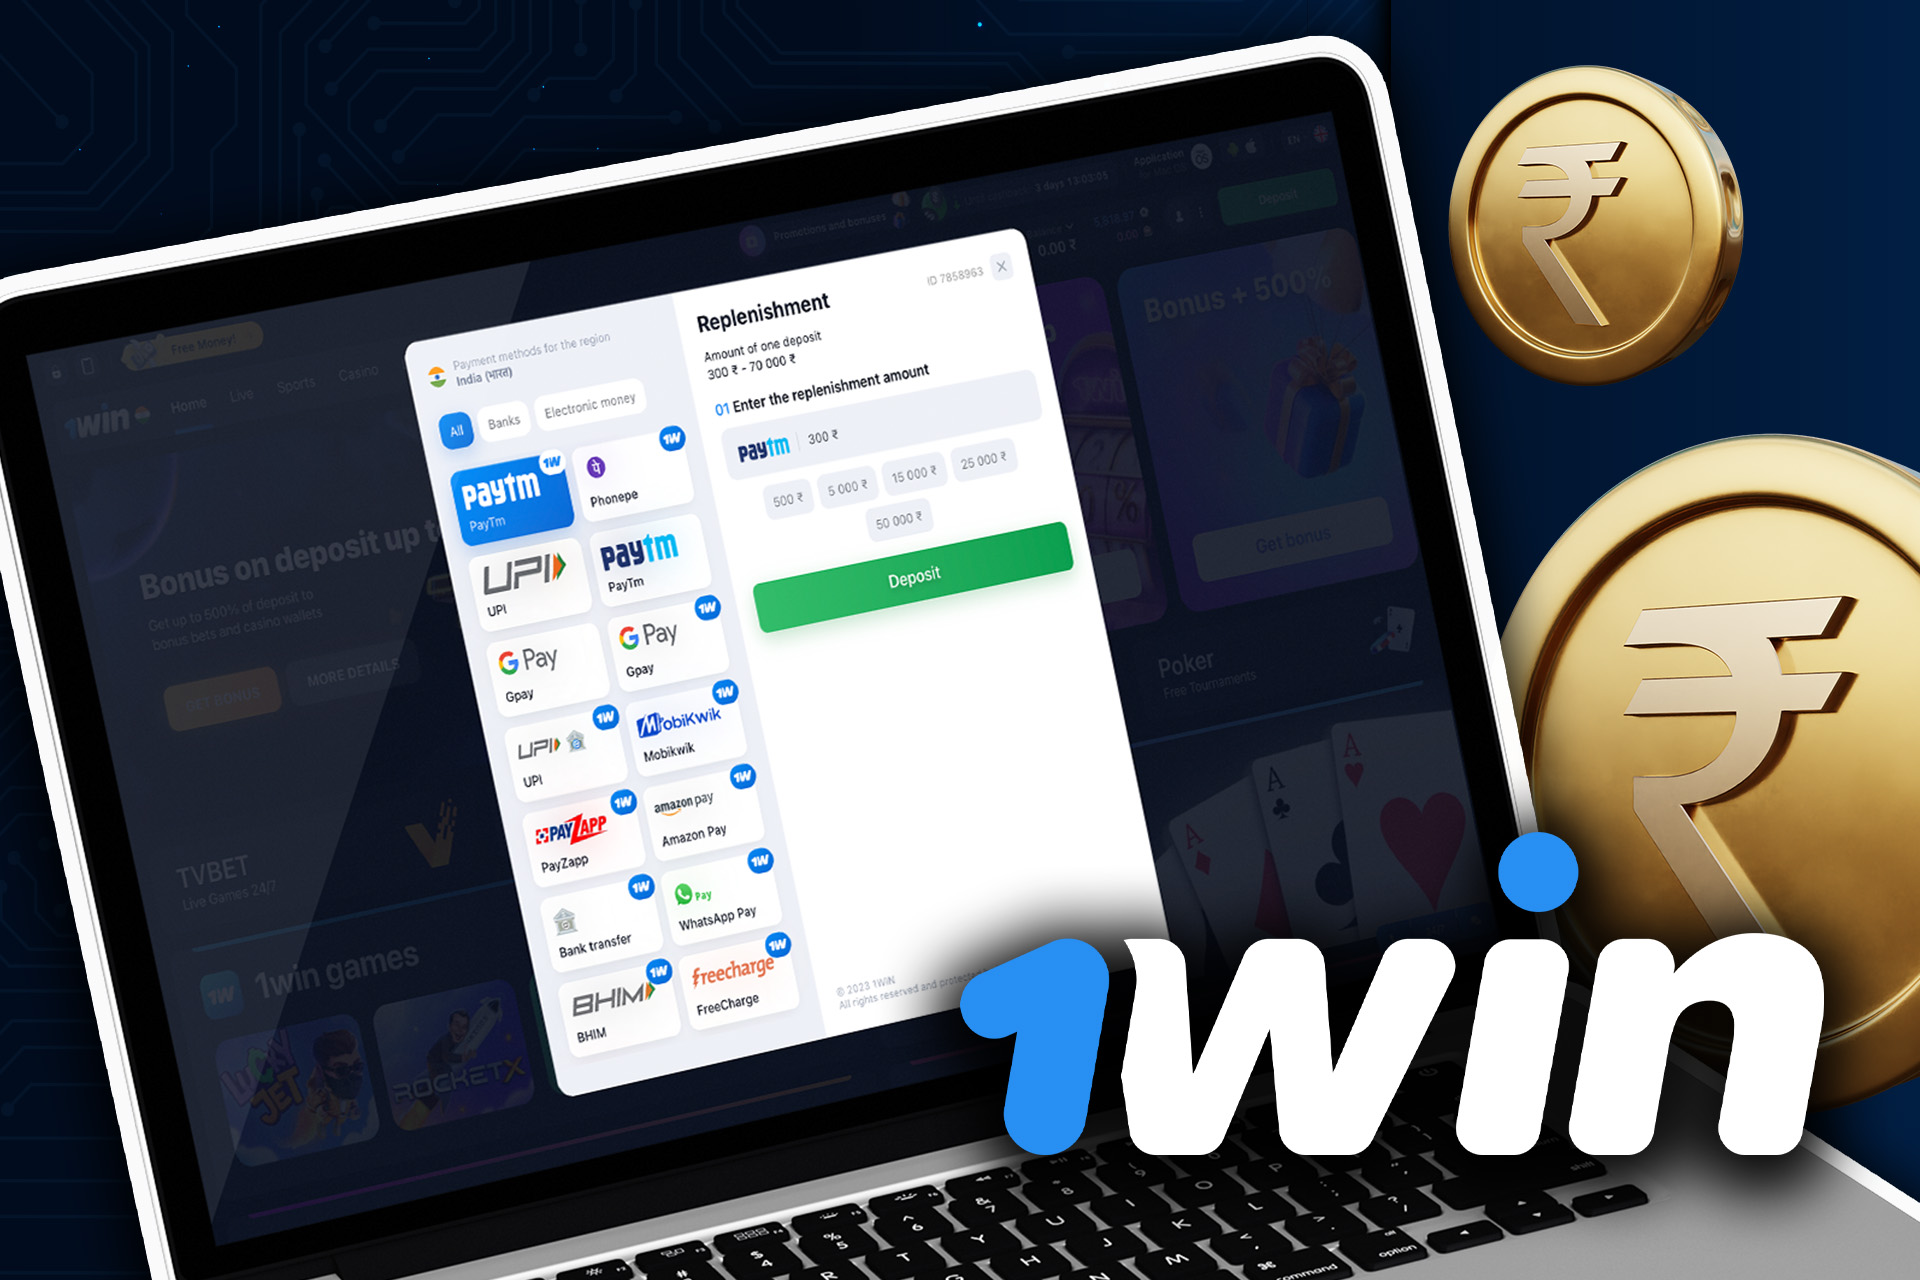 There are various payment methods to deposit your 1win account and withdraw your winnings.